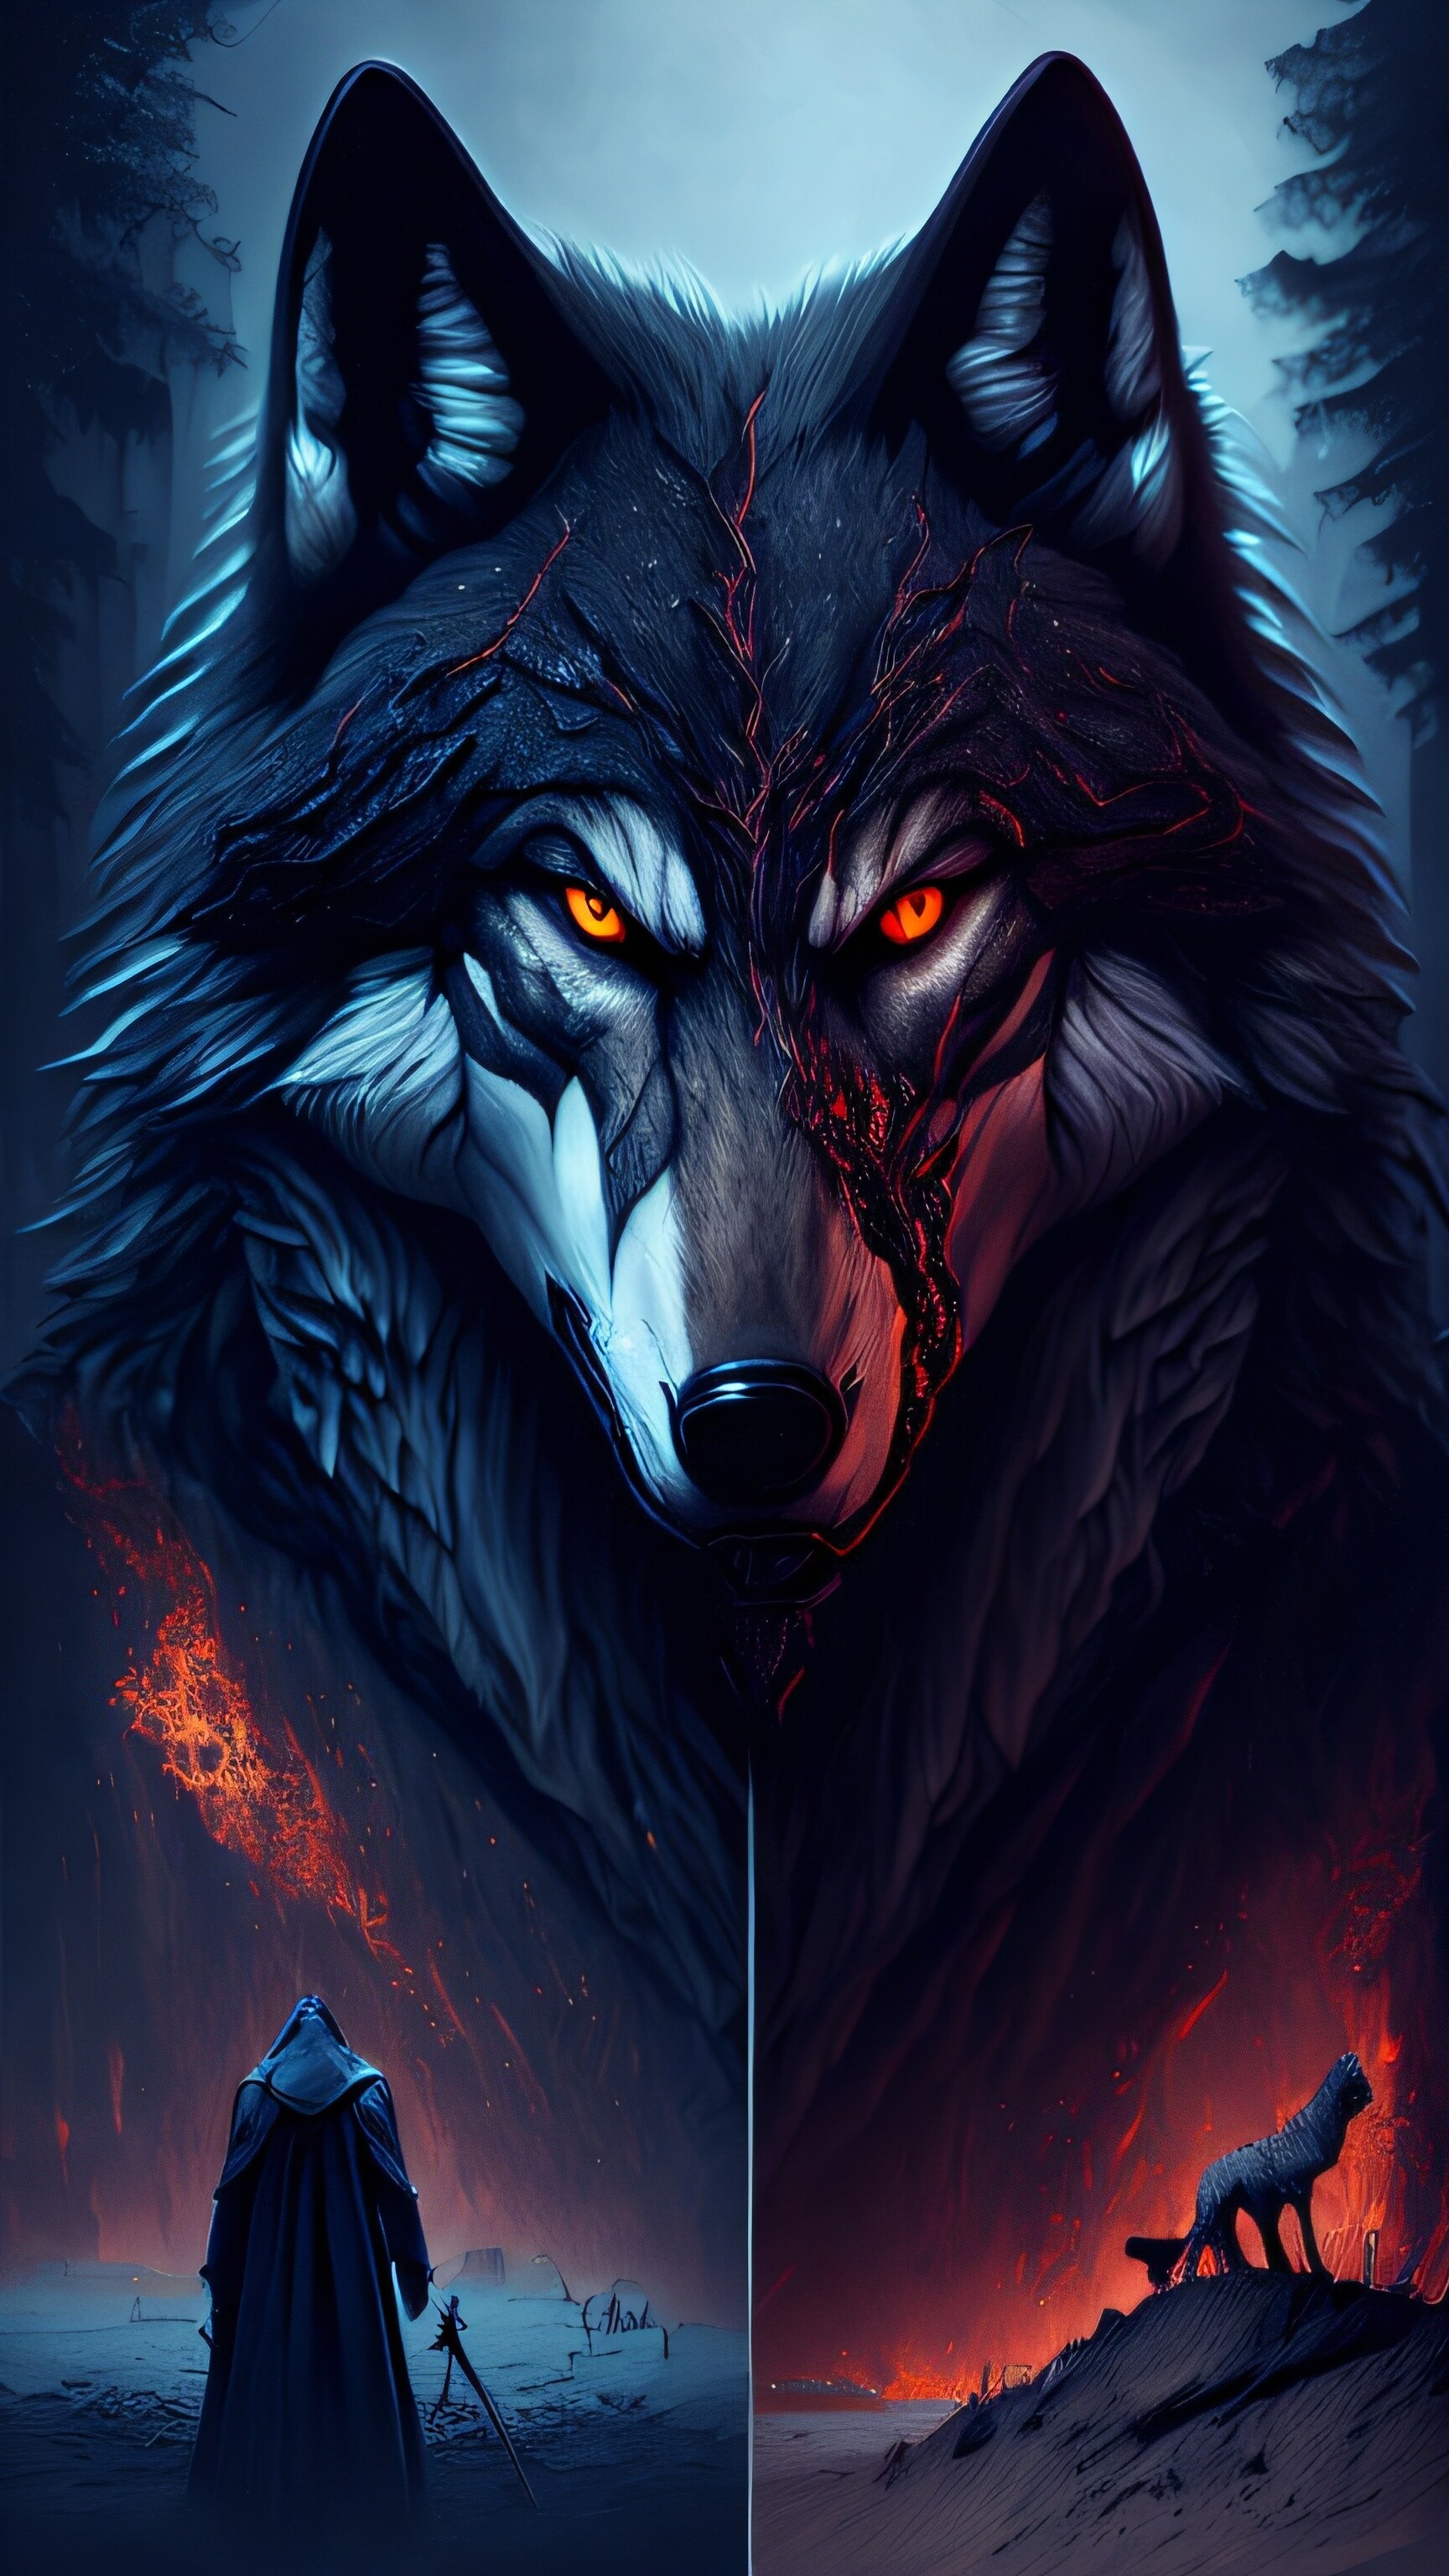 ArtStation - Functional Wolf Images for Your Business Needs | Artworks